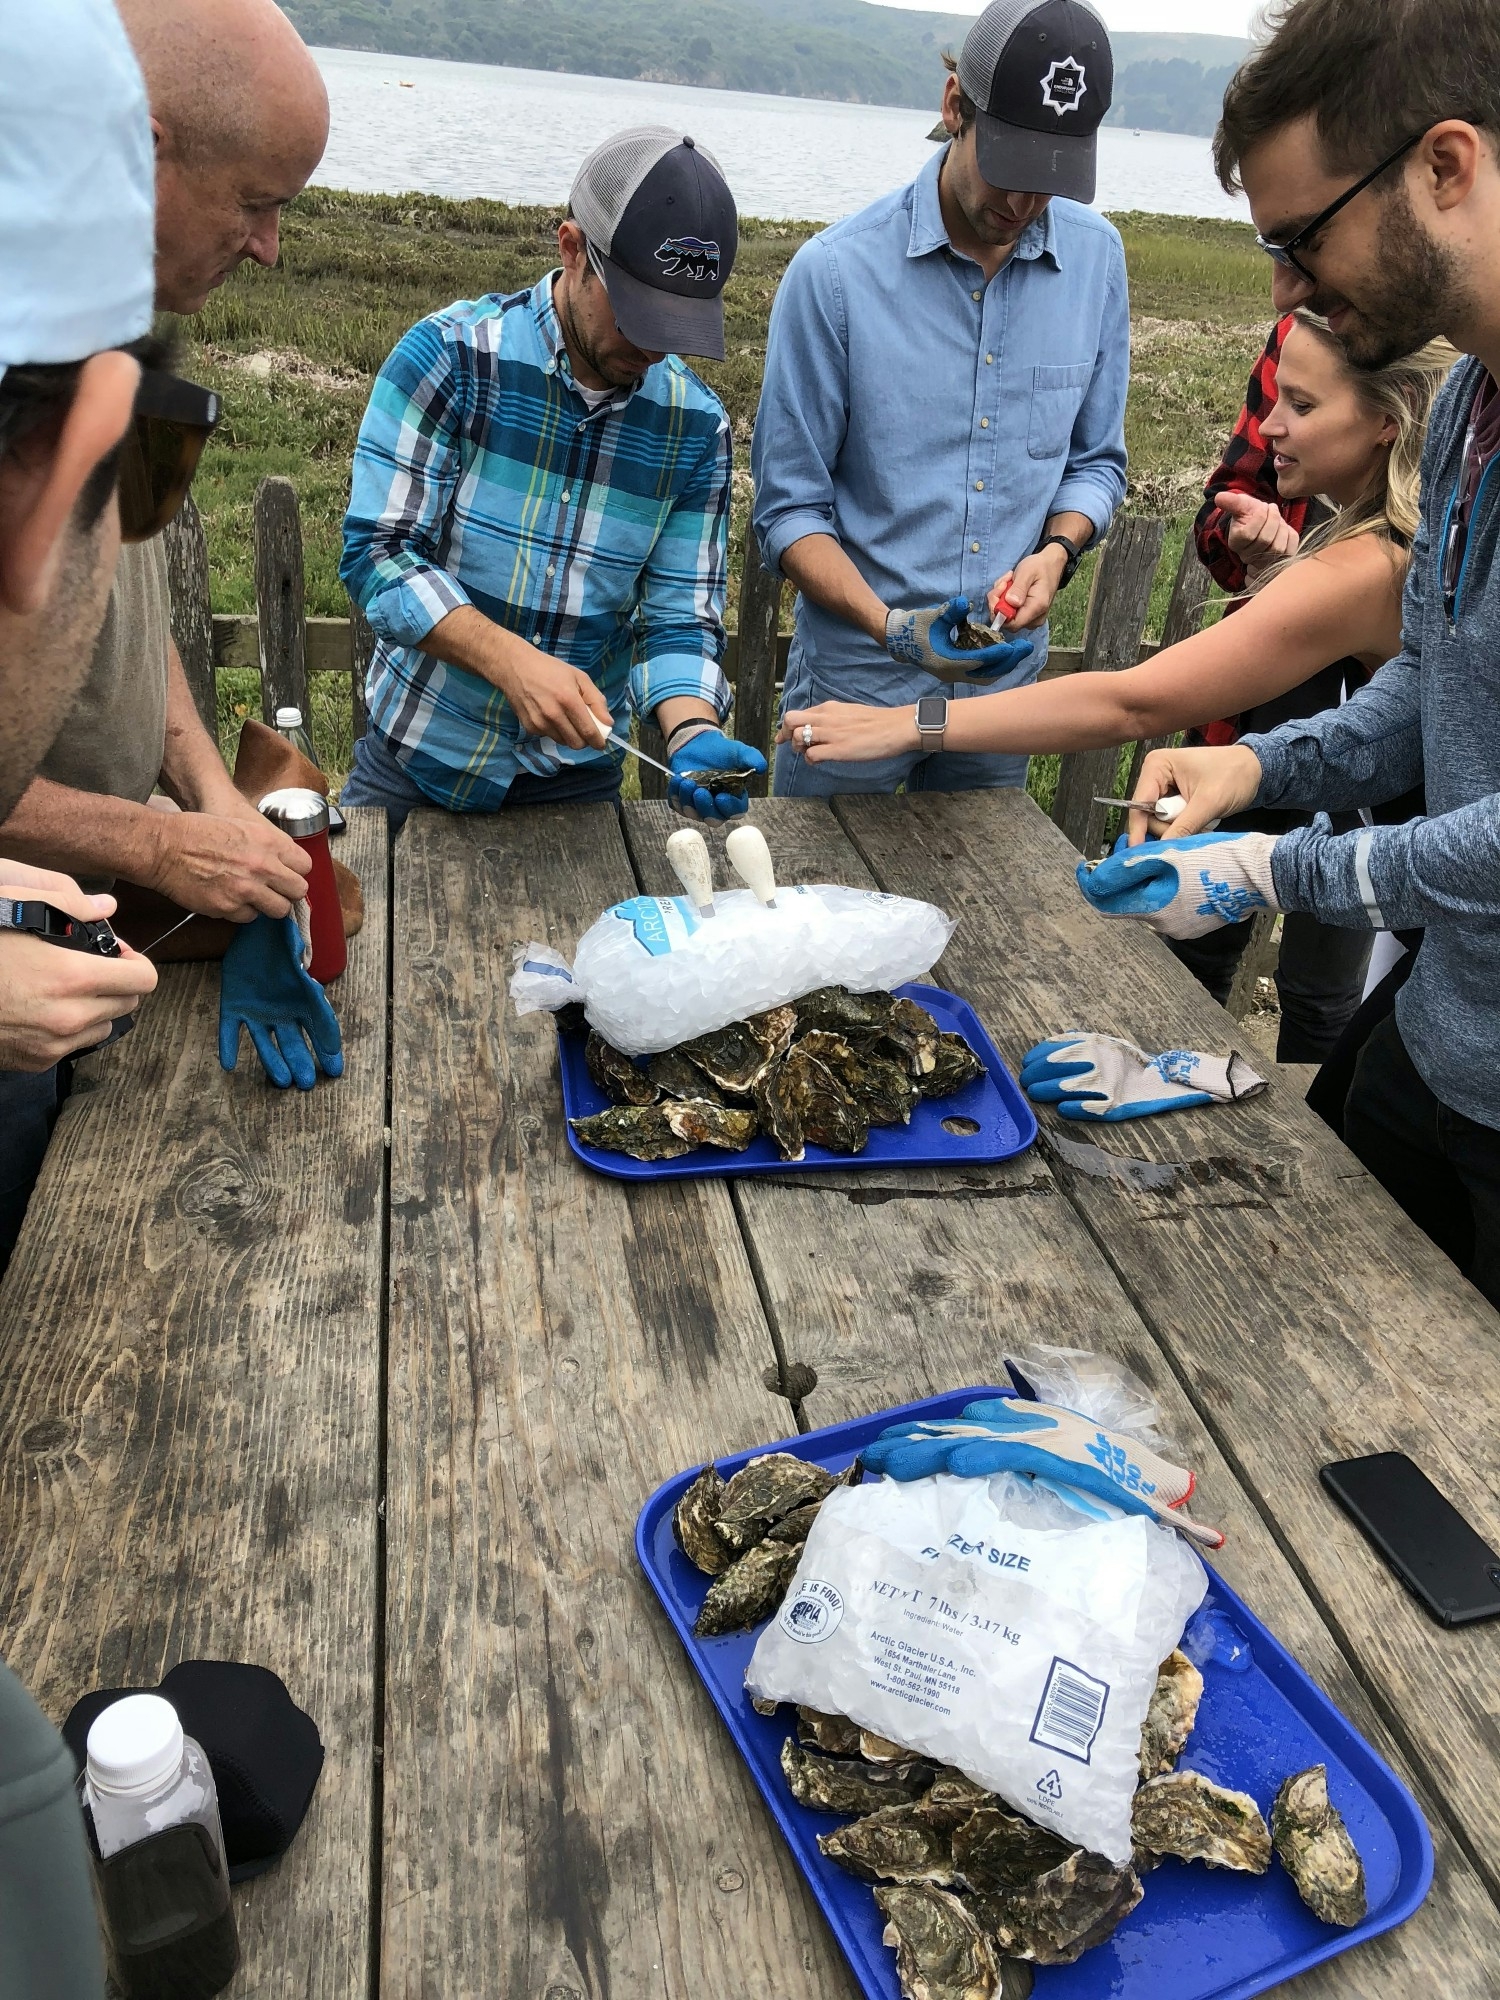 Shucking oysters at a company retreat.